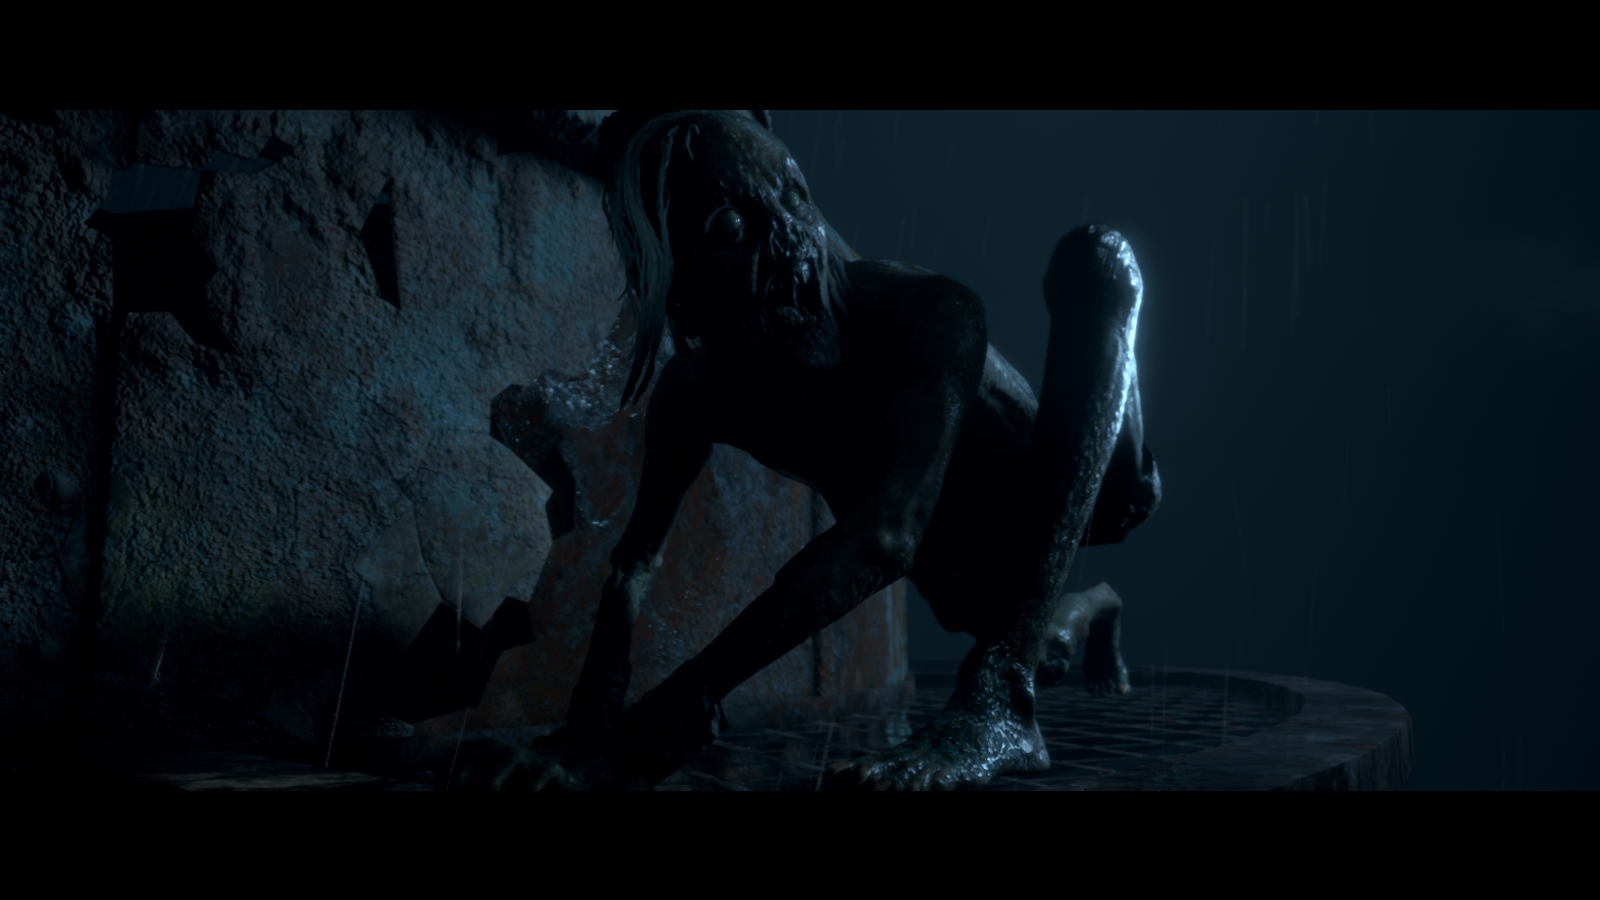 Screenshots for The Dark Pictures Anthology: Man of Medan. 